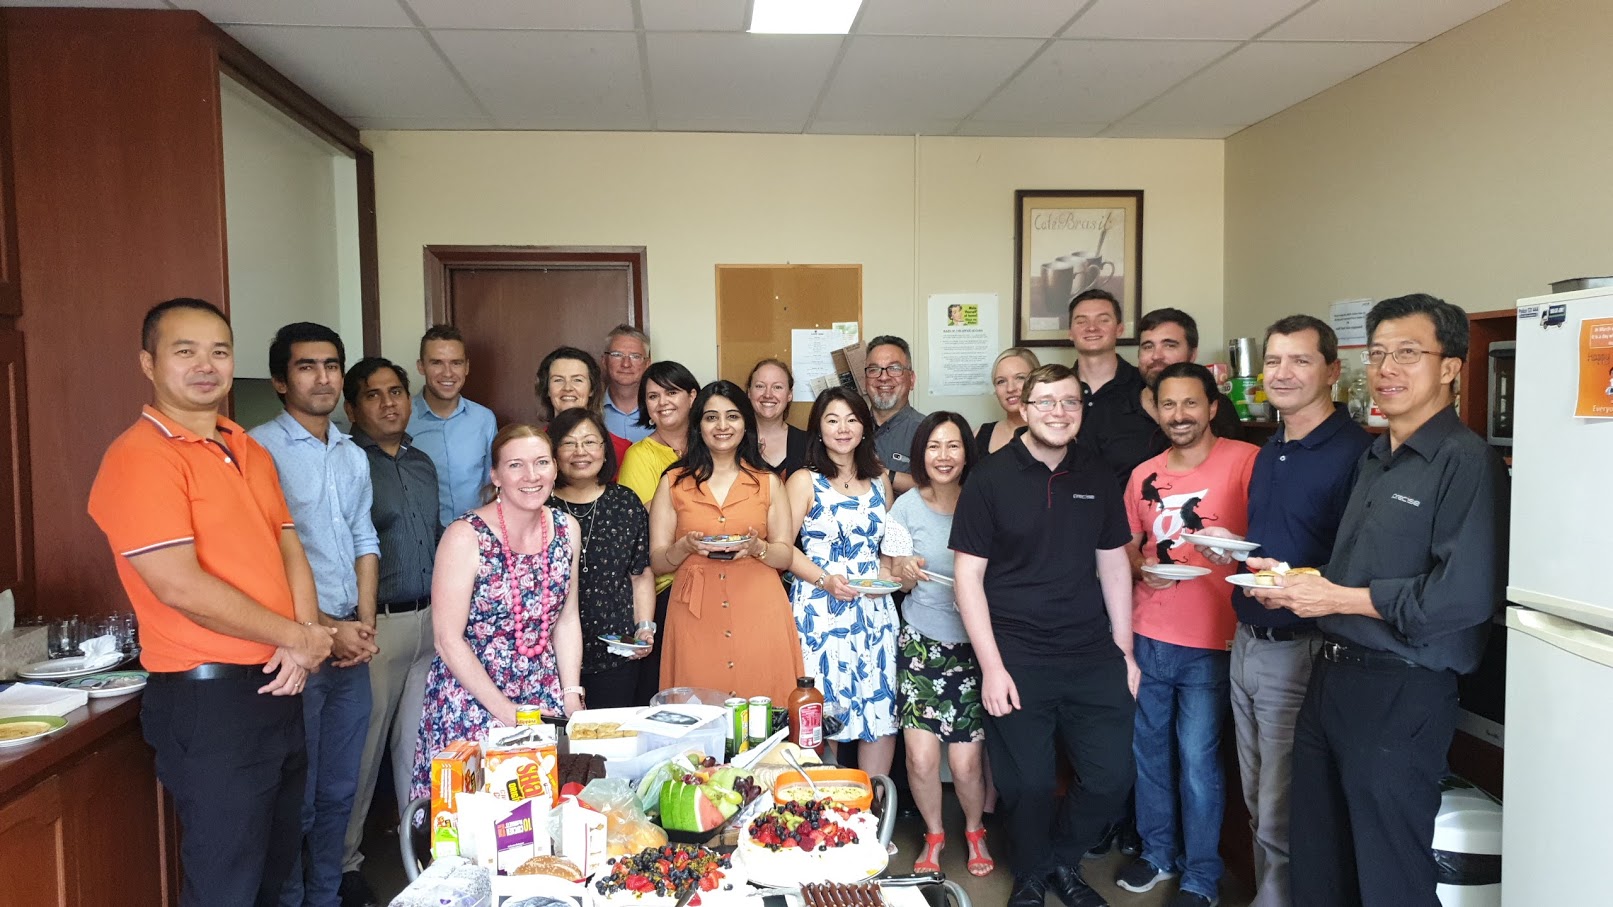 Part of the Precise culture is regular social get togethers for staff - pictured here: a group of staff enjoying a Harmony Day feast